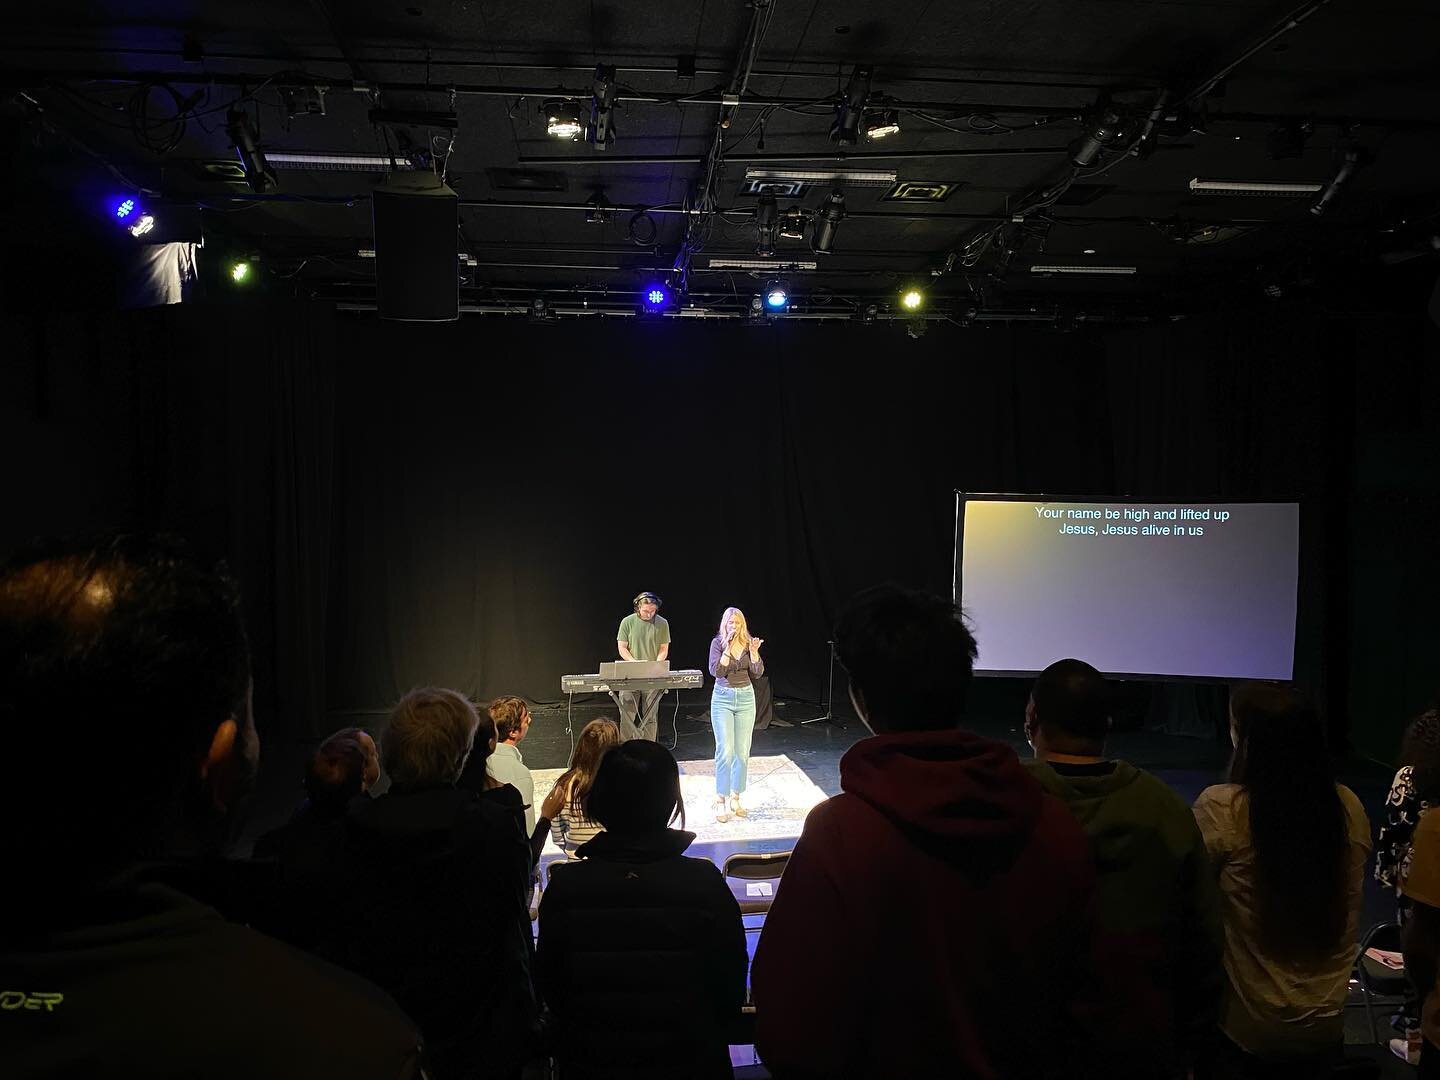 Last Sunday was amazing! We&rsquo;re looking forward to coming together again this Sunday, to keep growing our faith, and being able to connect with you! Join us tomorrow @ 11 am at Nimbus Arts Center
 

🧡

#church #churchphotography #sundayservice 